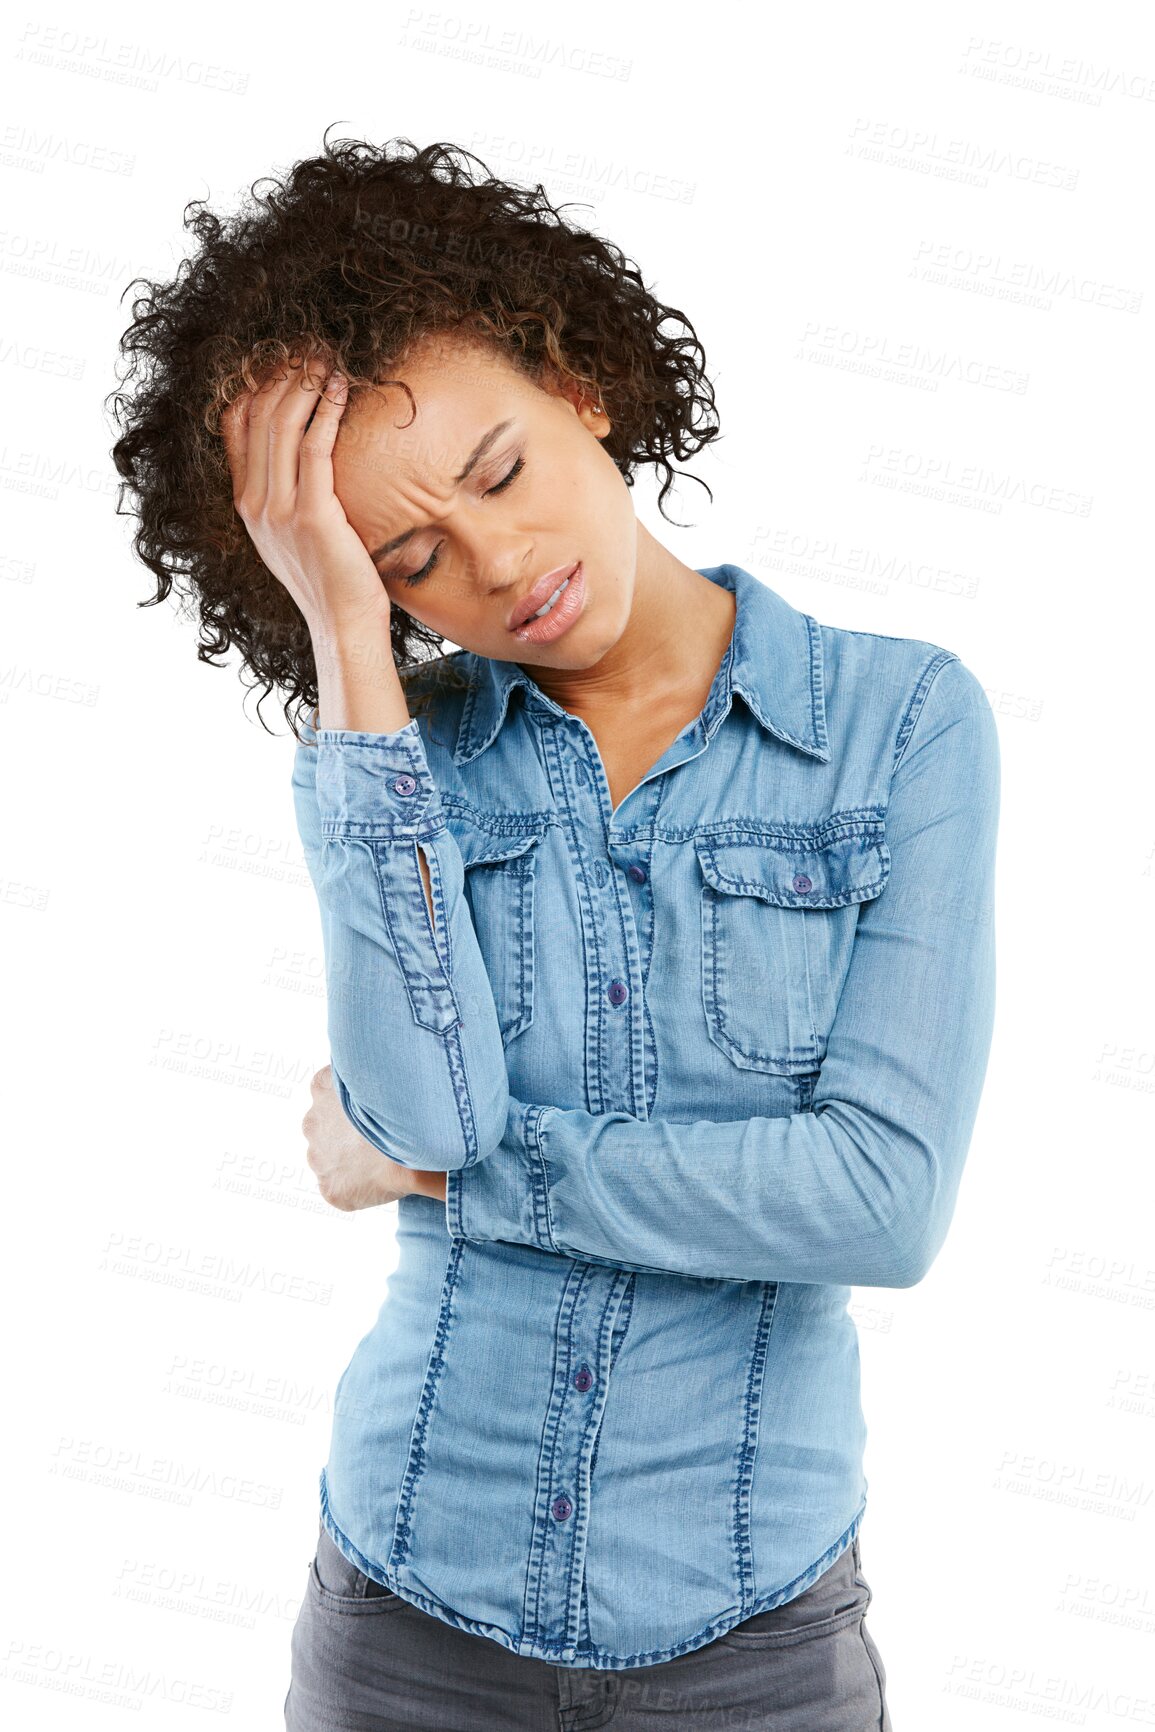 Buy stock photo Frustrated woman, headache and stress in bankruptcy standing isolated on a transparent PNG background. Upset female person in debt, financial crisis or anxiety from burnout, depression or head pain